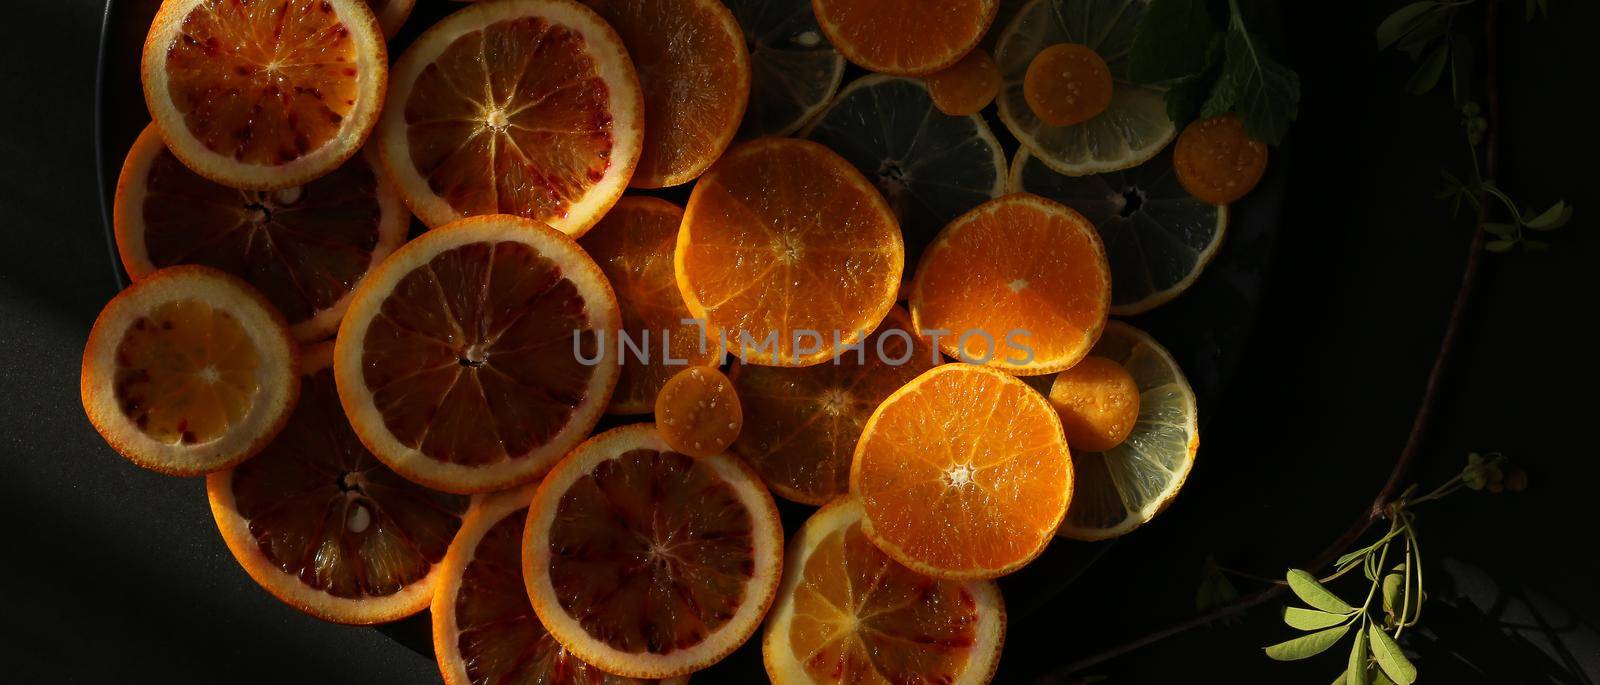 Citrus fruits collection. Artistic dramatic food background